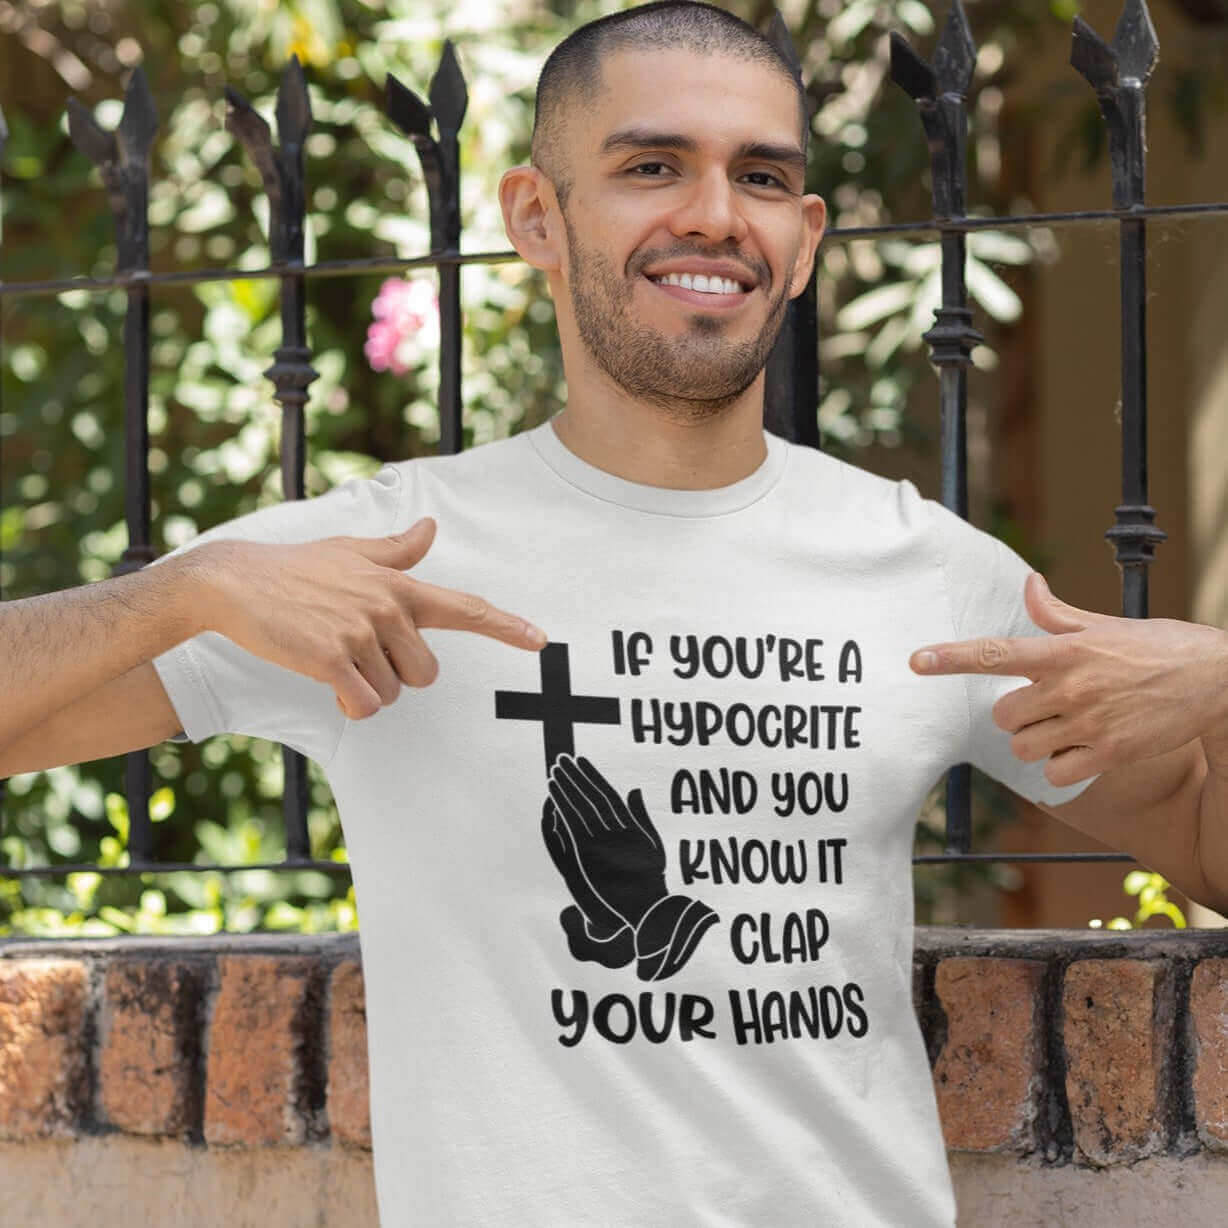 If you're a hypocrite and you know it clap your hands funny short sleeve unisex T-shirt